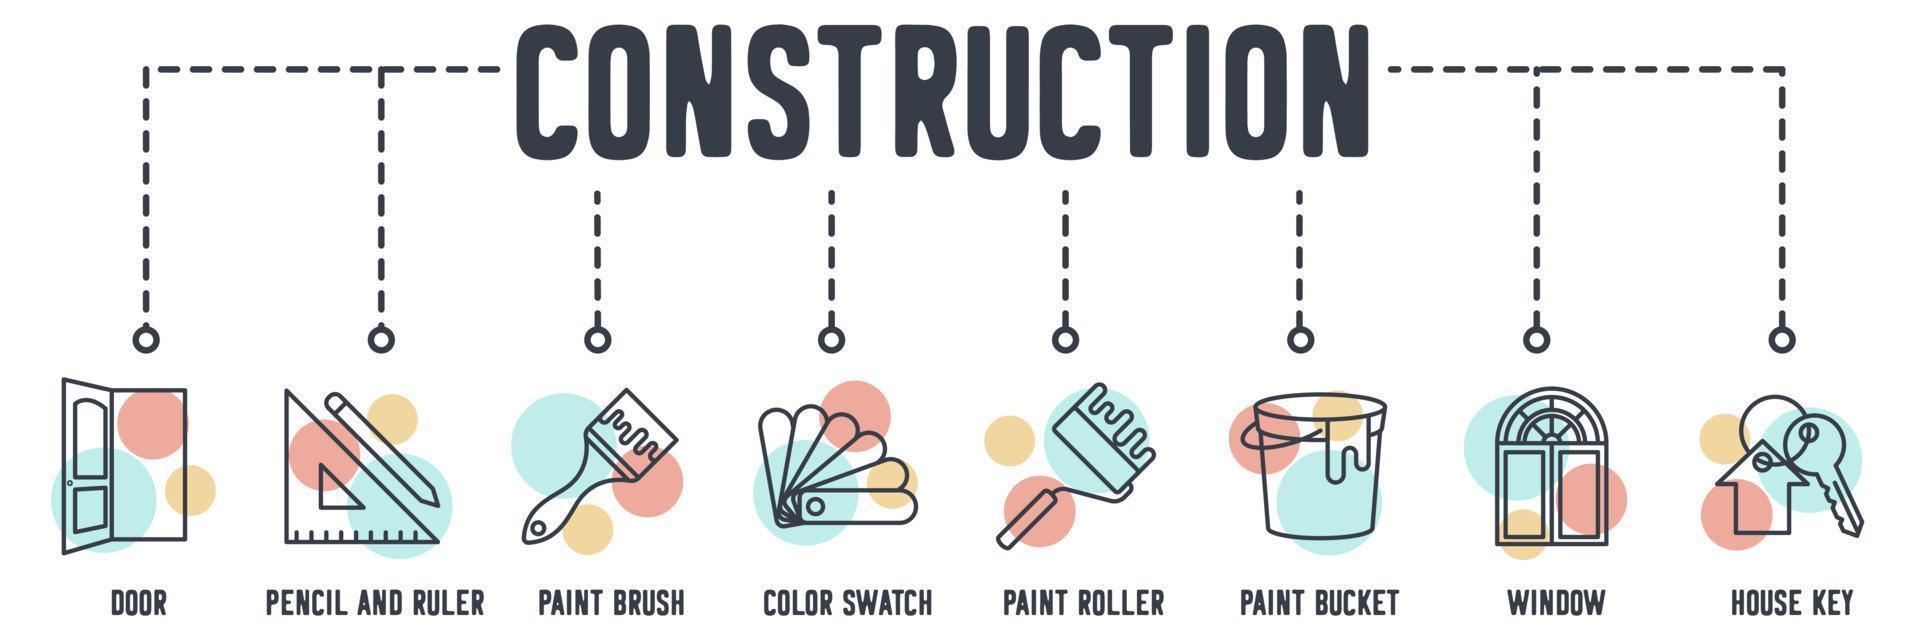 Construction banner web icon. door, pencil and ruler, paint brush, color swatch, paint roller, paint bucket, window, house key vector illustration concept.